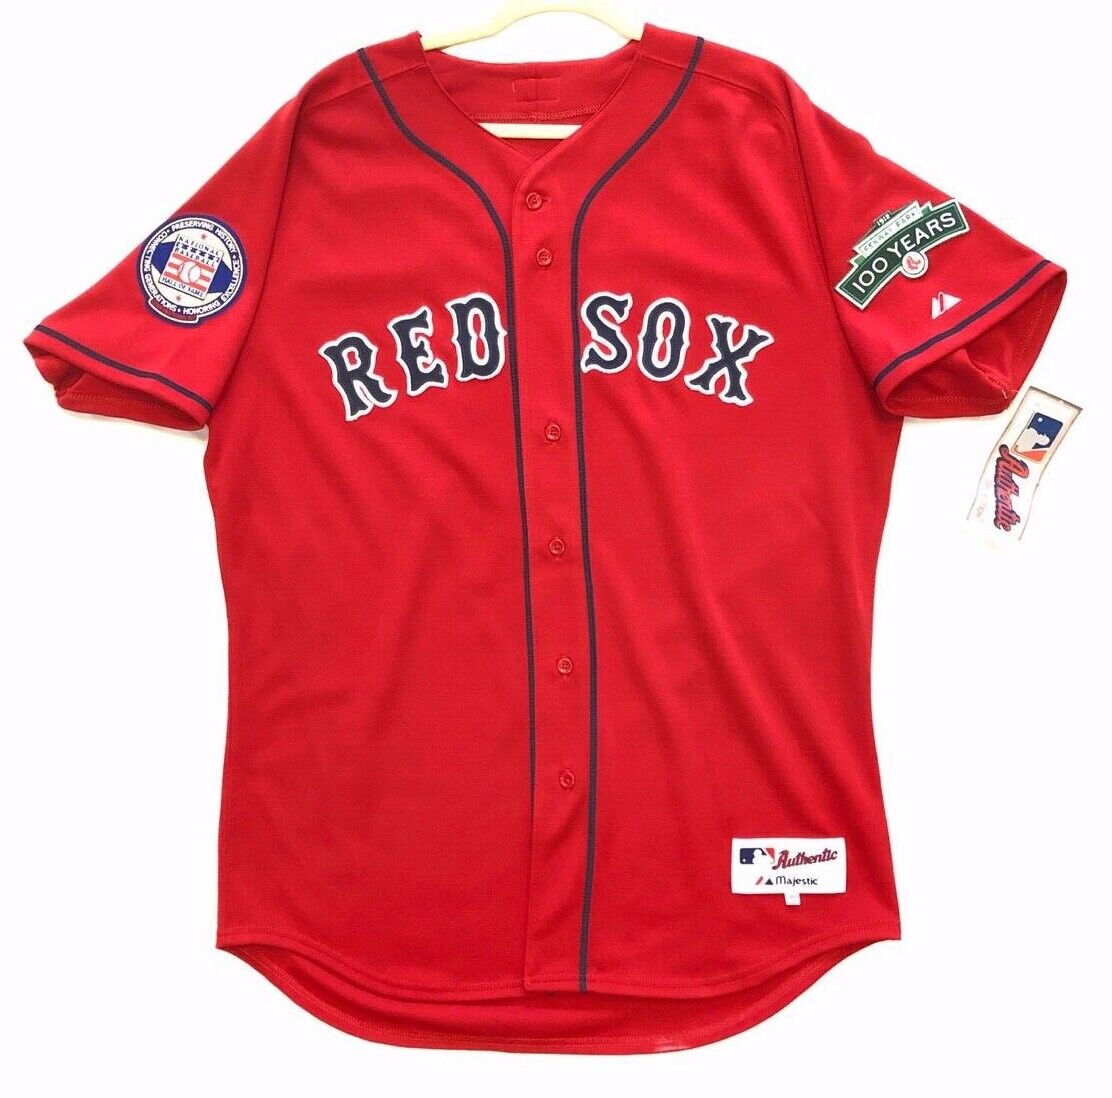 Boston Red Sox BLANK Red Alternate Baseball Jersey By Majestic. Fits 3XL /  4XL